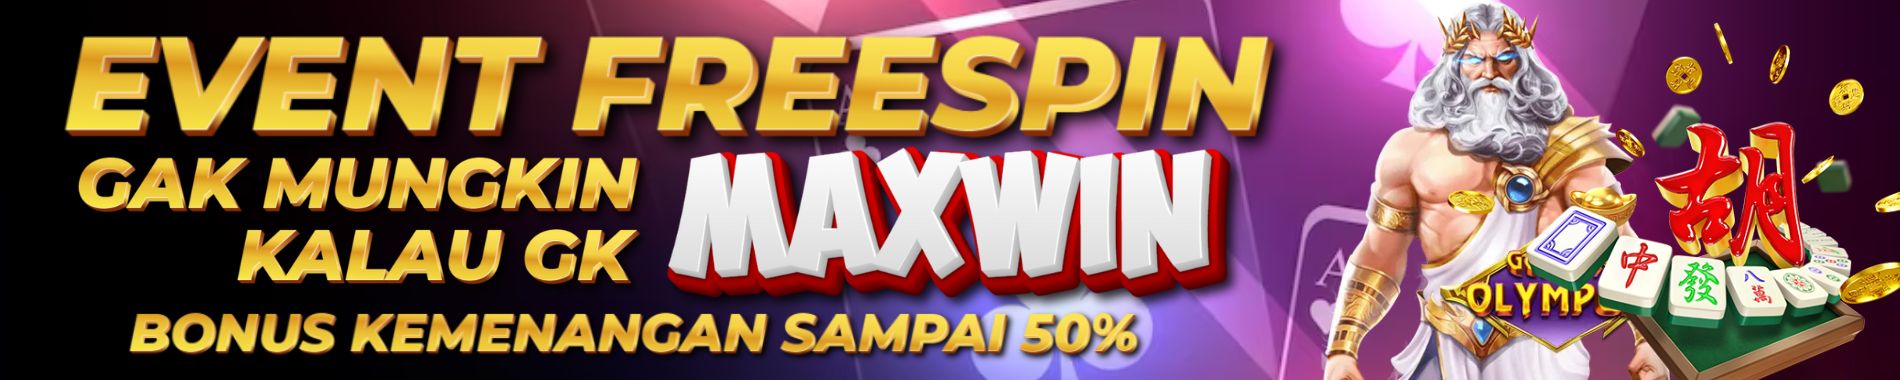 EVENT FREESPIN ELEVENS4D